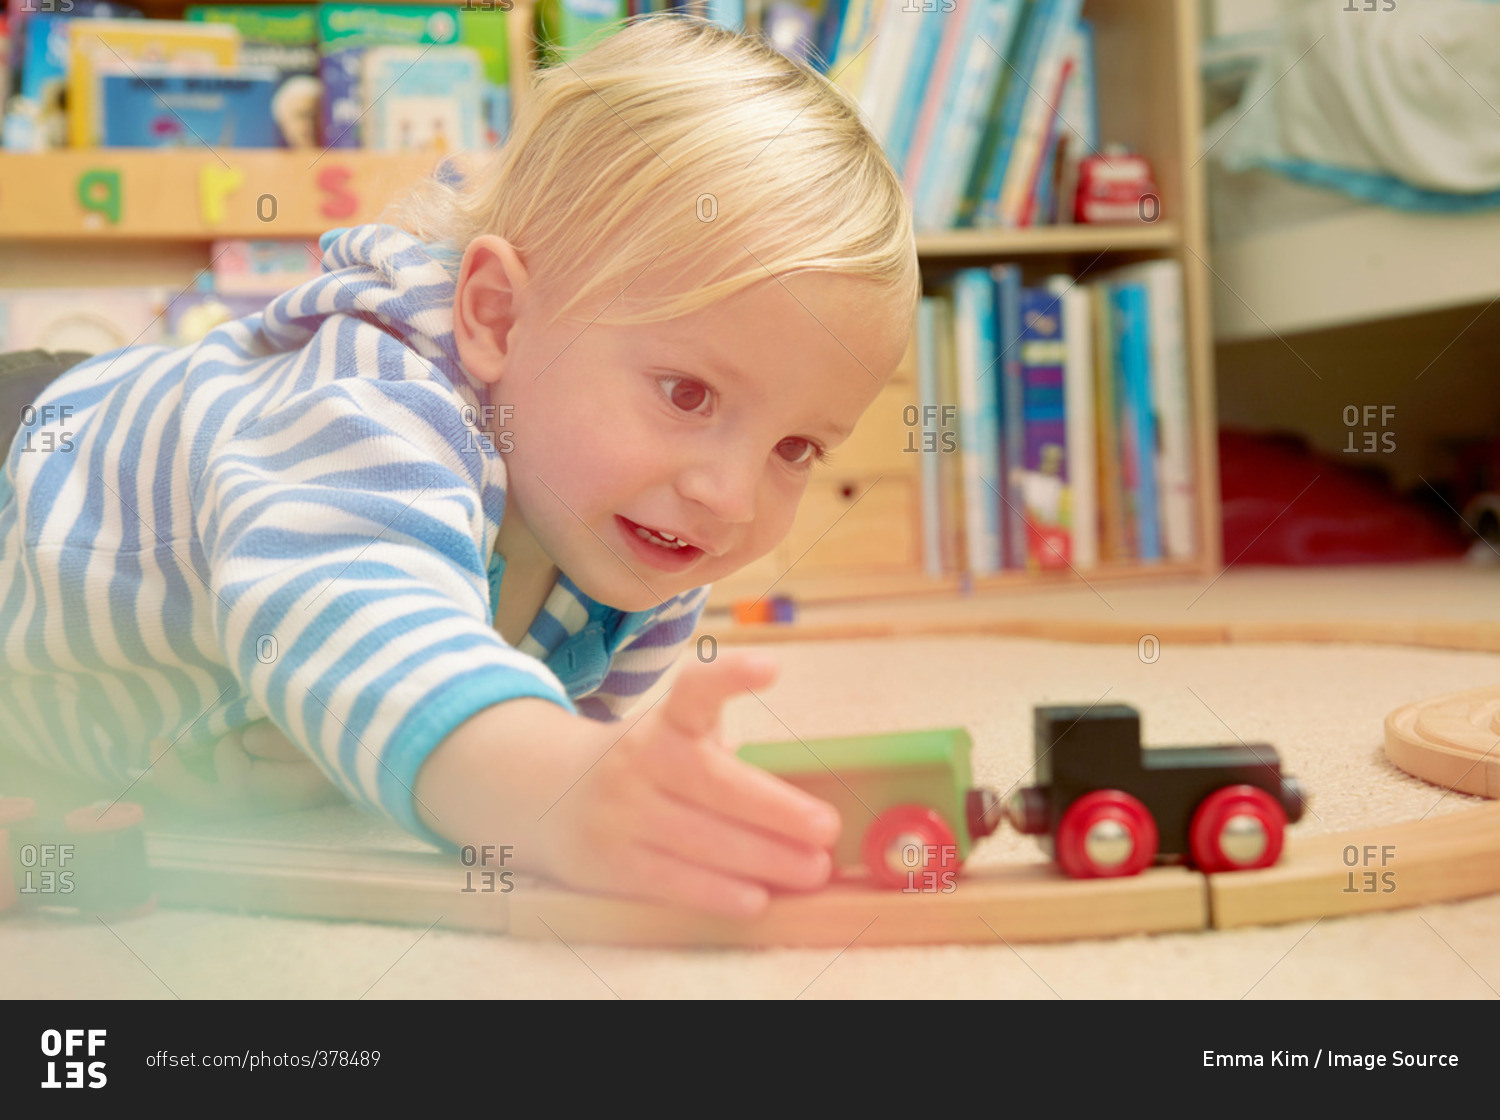 Baby boy playing with train set